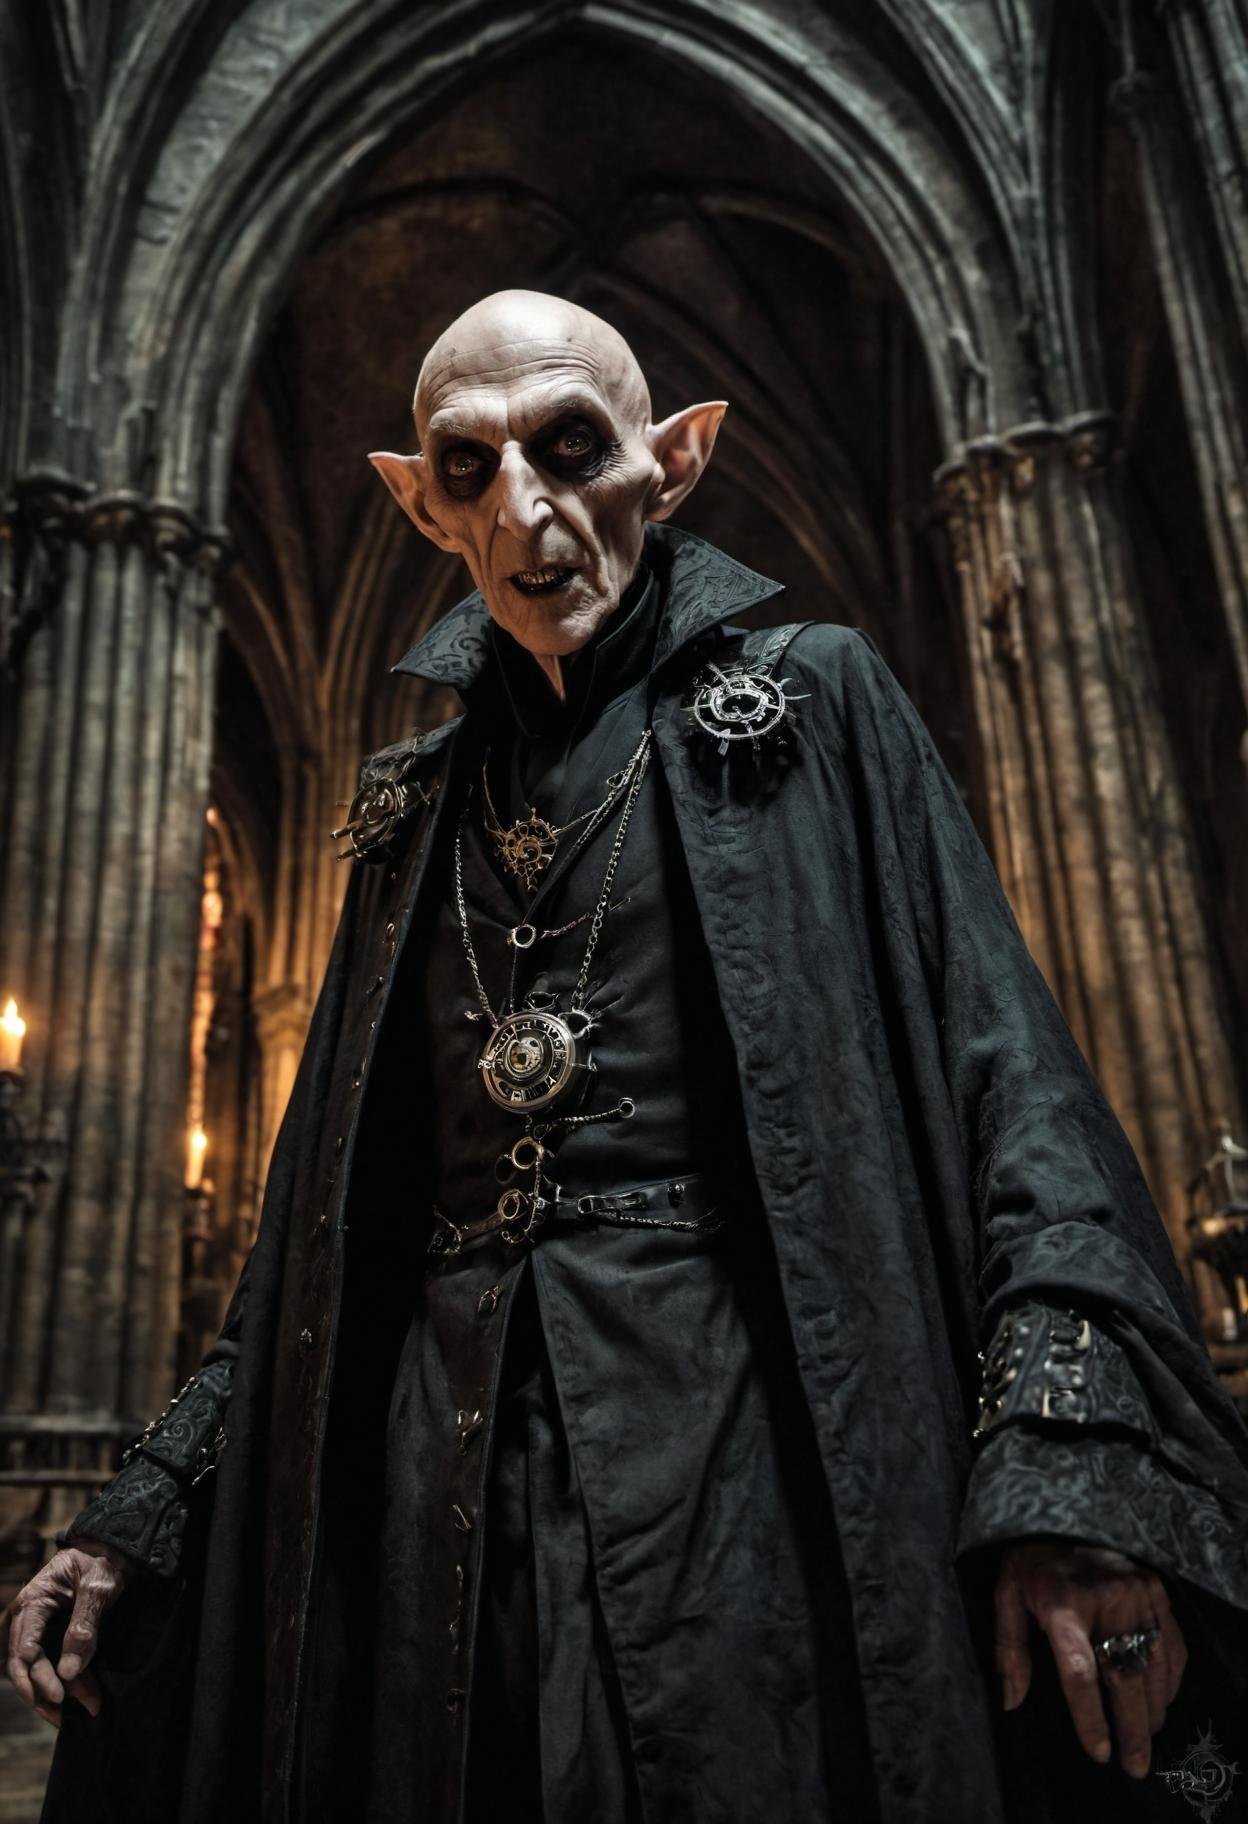 Steampunk style, cogs, clockwork machinery, night time, low angle, terrifying fierce male Nosferatu vampire lord, (gaunt face, emaciated, haunting big eyes, elderly, bald, wrinkled skin:1.3),( long fangs:1.3), tattered robes, pasty skin, dark gothic cathedral interior, detailed background